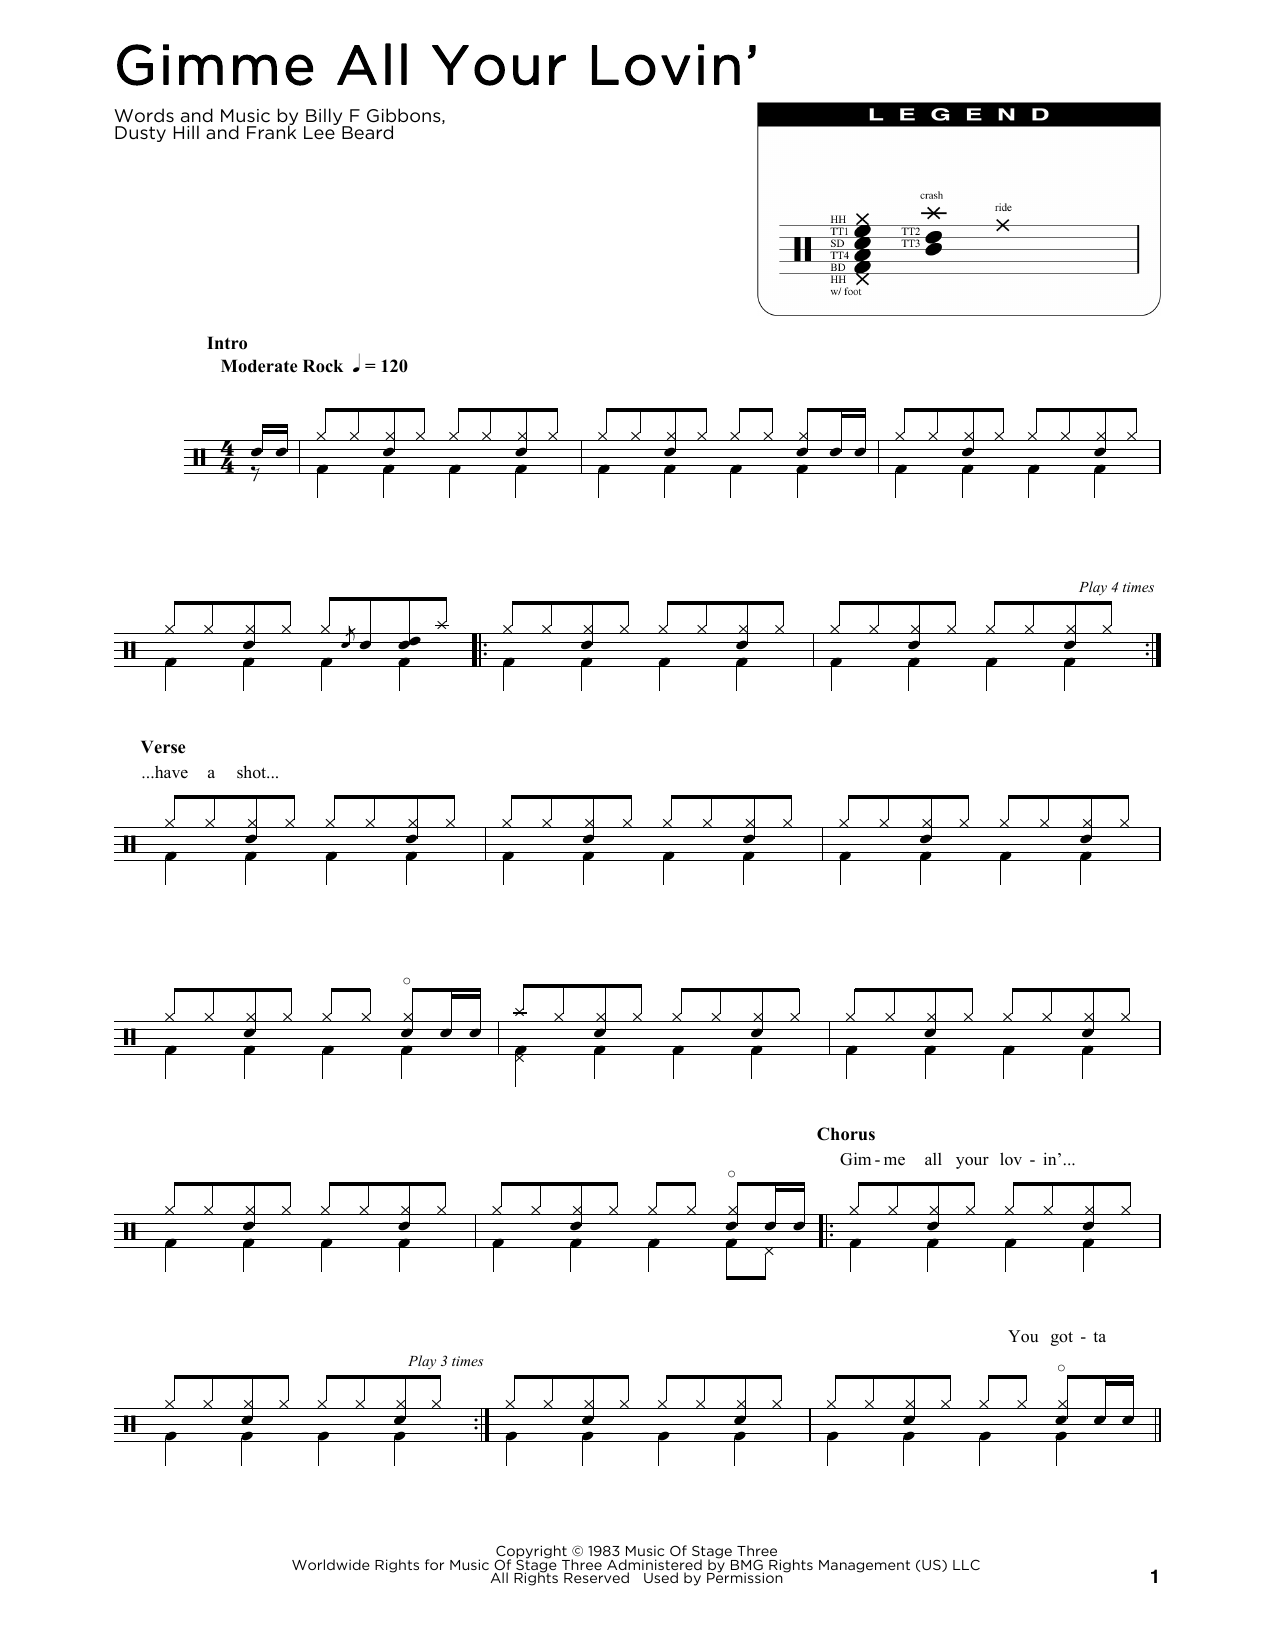 Download ZZ Top Gimme All Your Lovin' Sheet Music